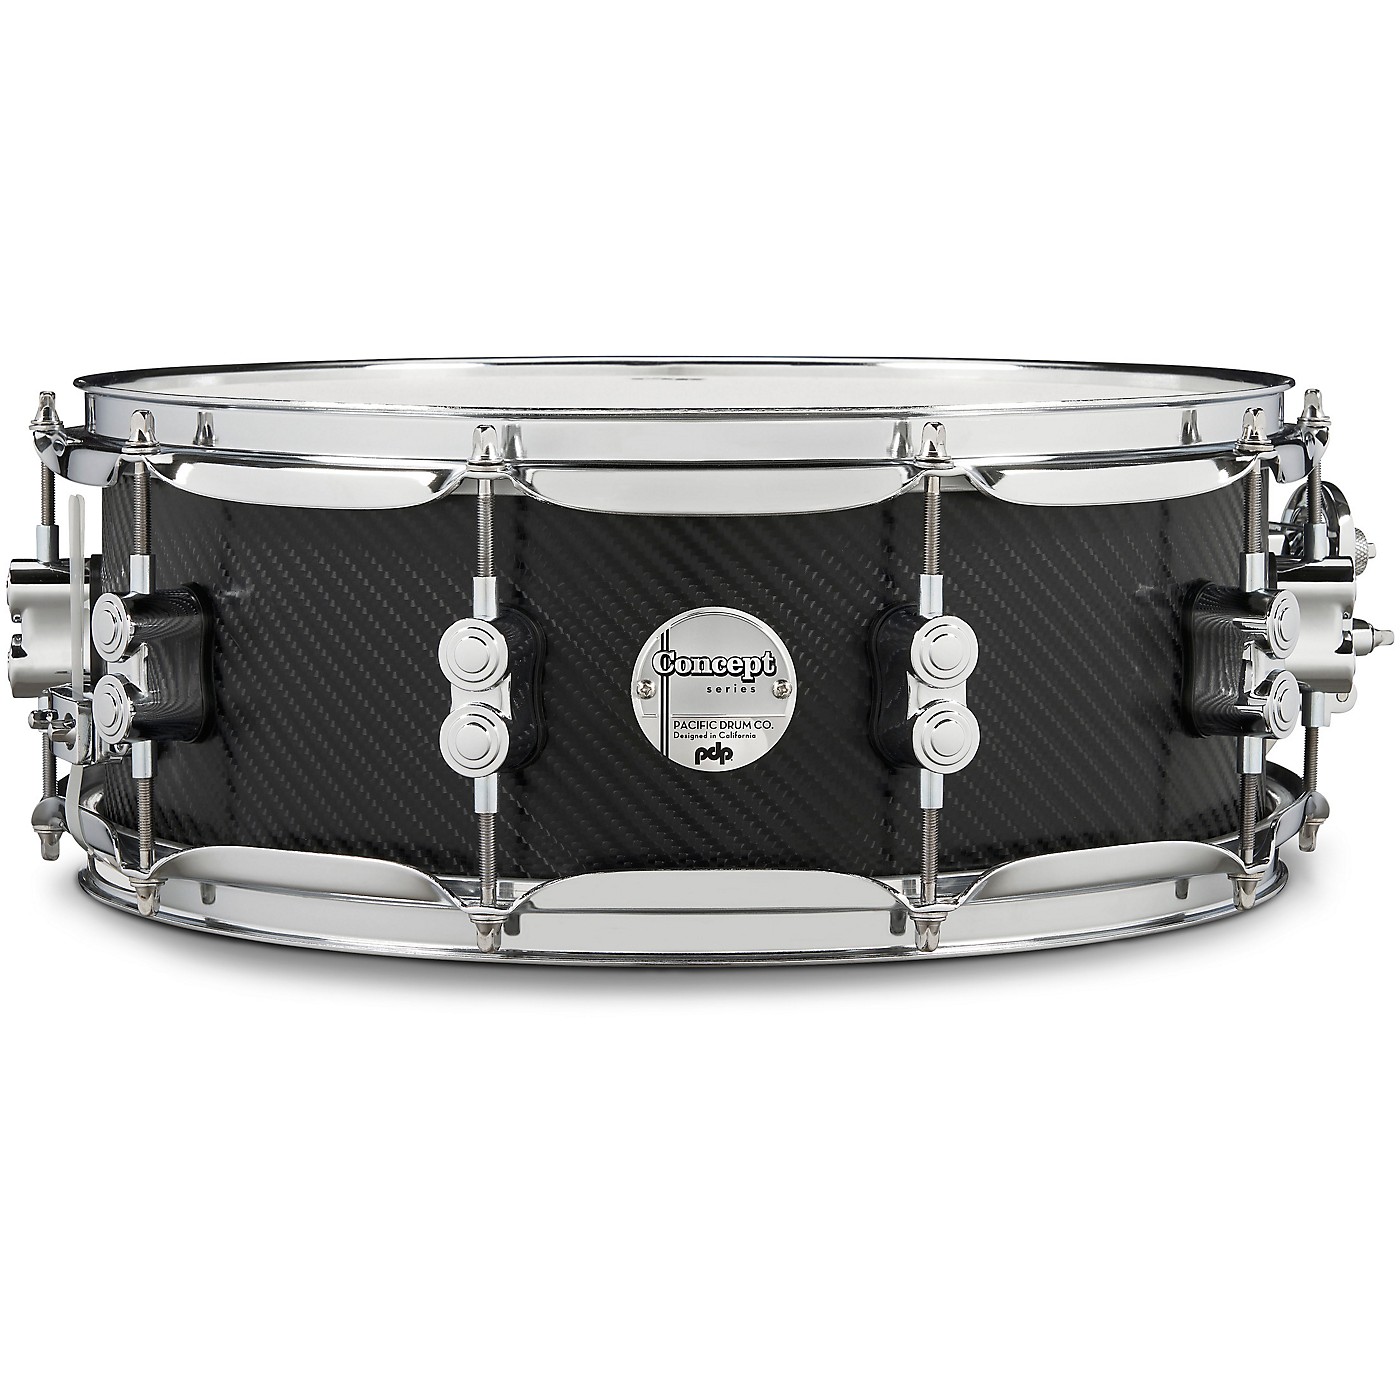 PDP Concept Maple Snare Drum with Chrome Hardware thumbnail